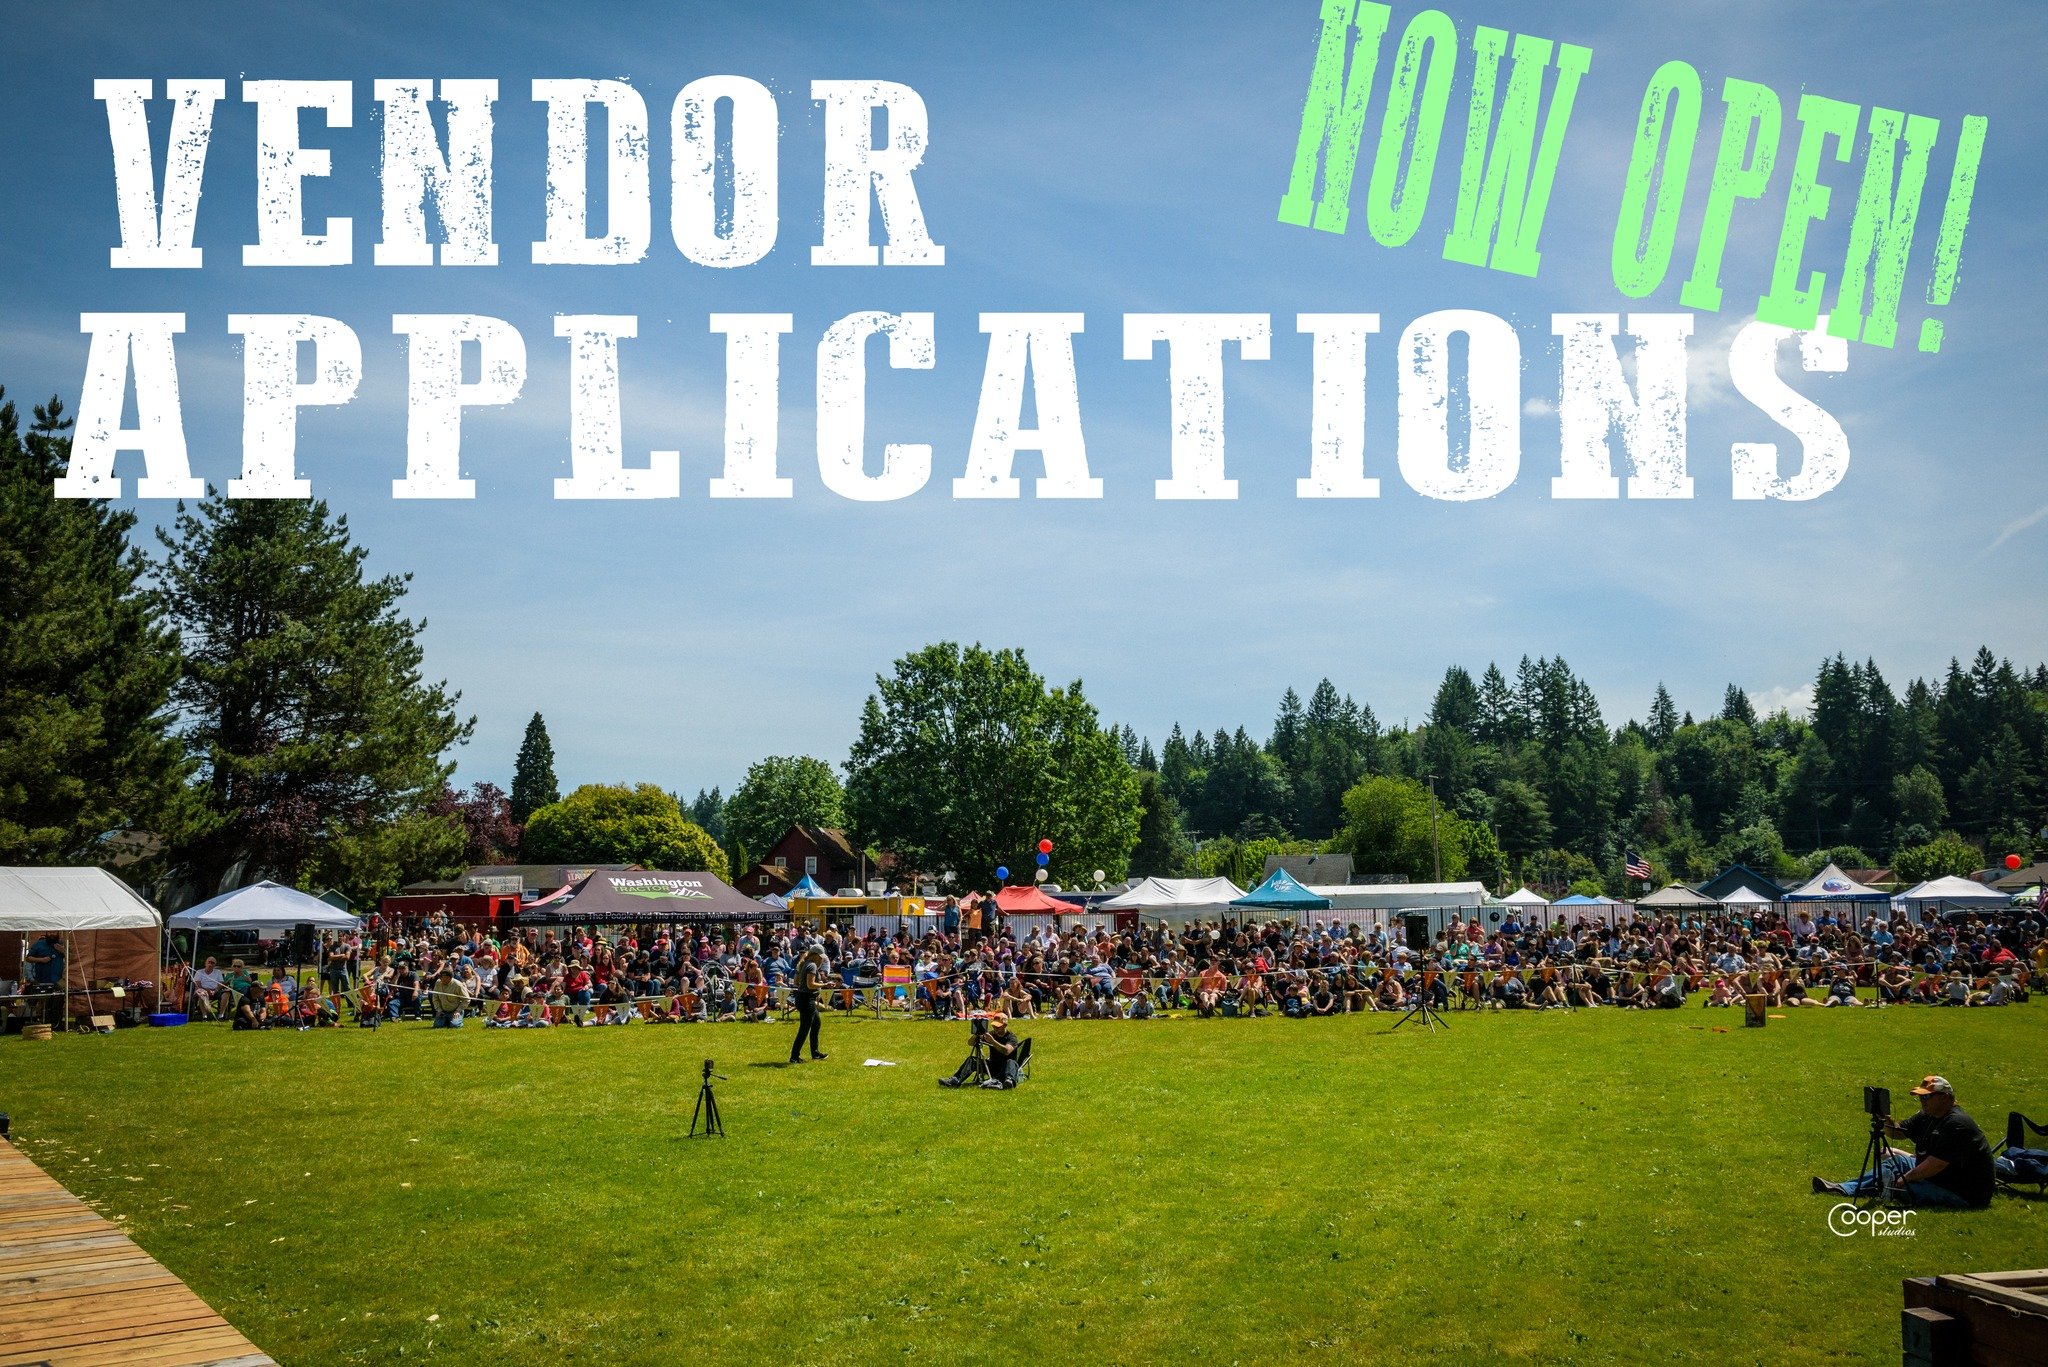 VENDOR APPLICATIONS - NOW OPEN!

Vendor opportunities are available during the Logging Show on Saturday June 1 and the Car Show on June 2 (Car Show vendors are limited to food and auto-related wares).

**BOOTH SPACE IS 10x10 - book multiple if your b